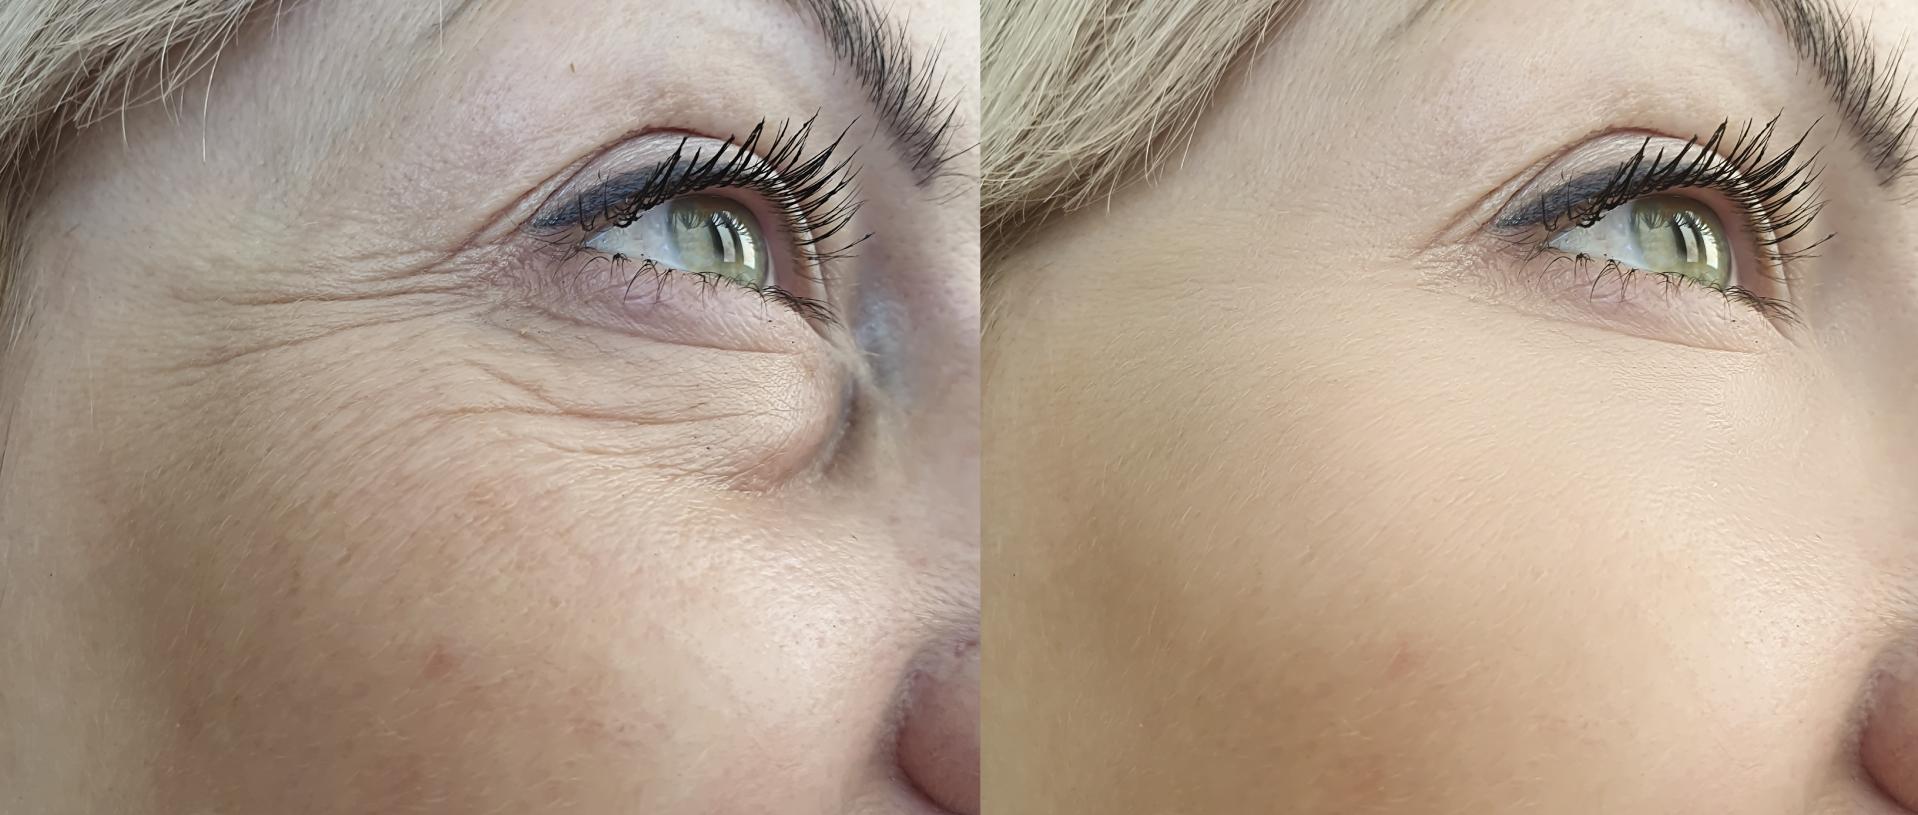 woman face wrinkles before and after treatment